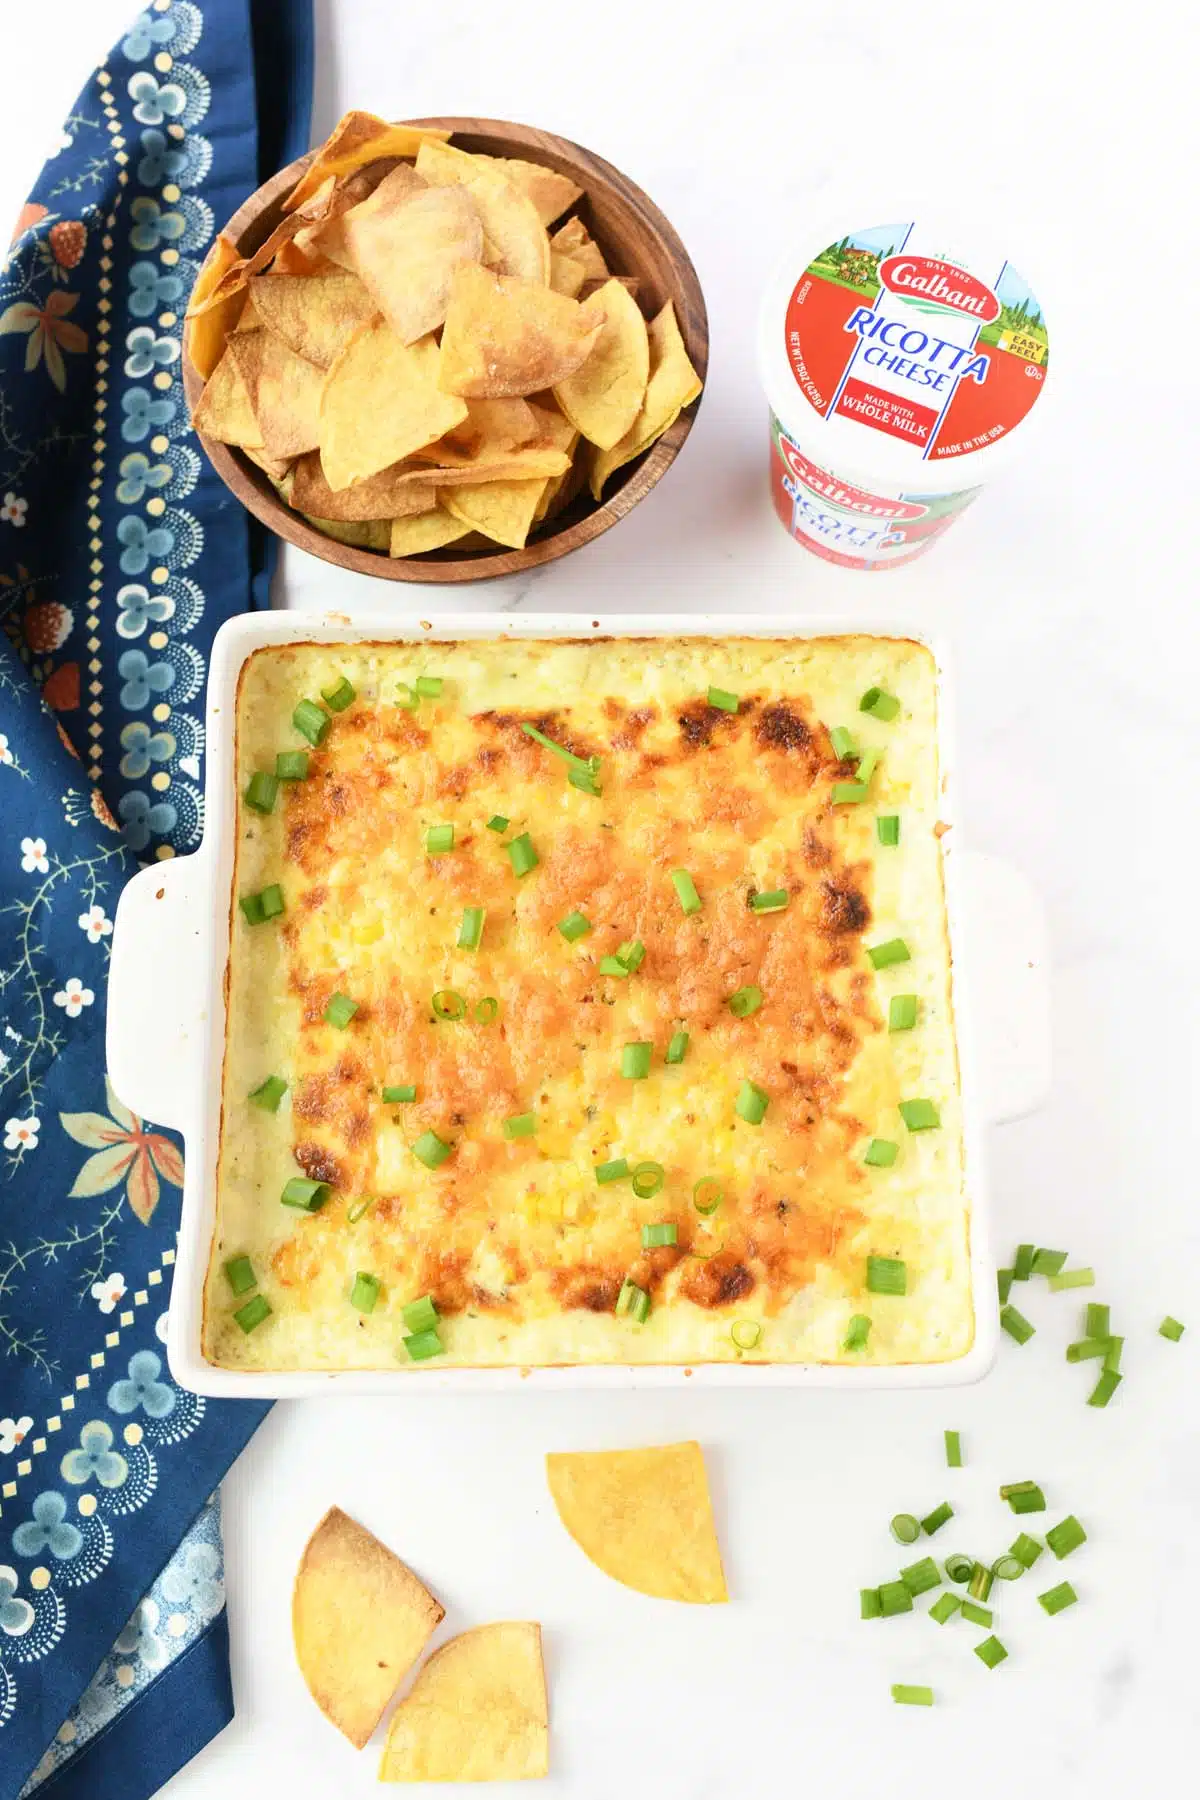 Golden-brown cheesy corn dip with chips and Galbani cheese.